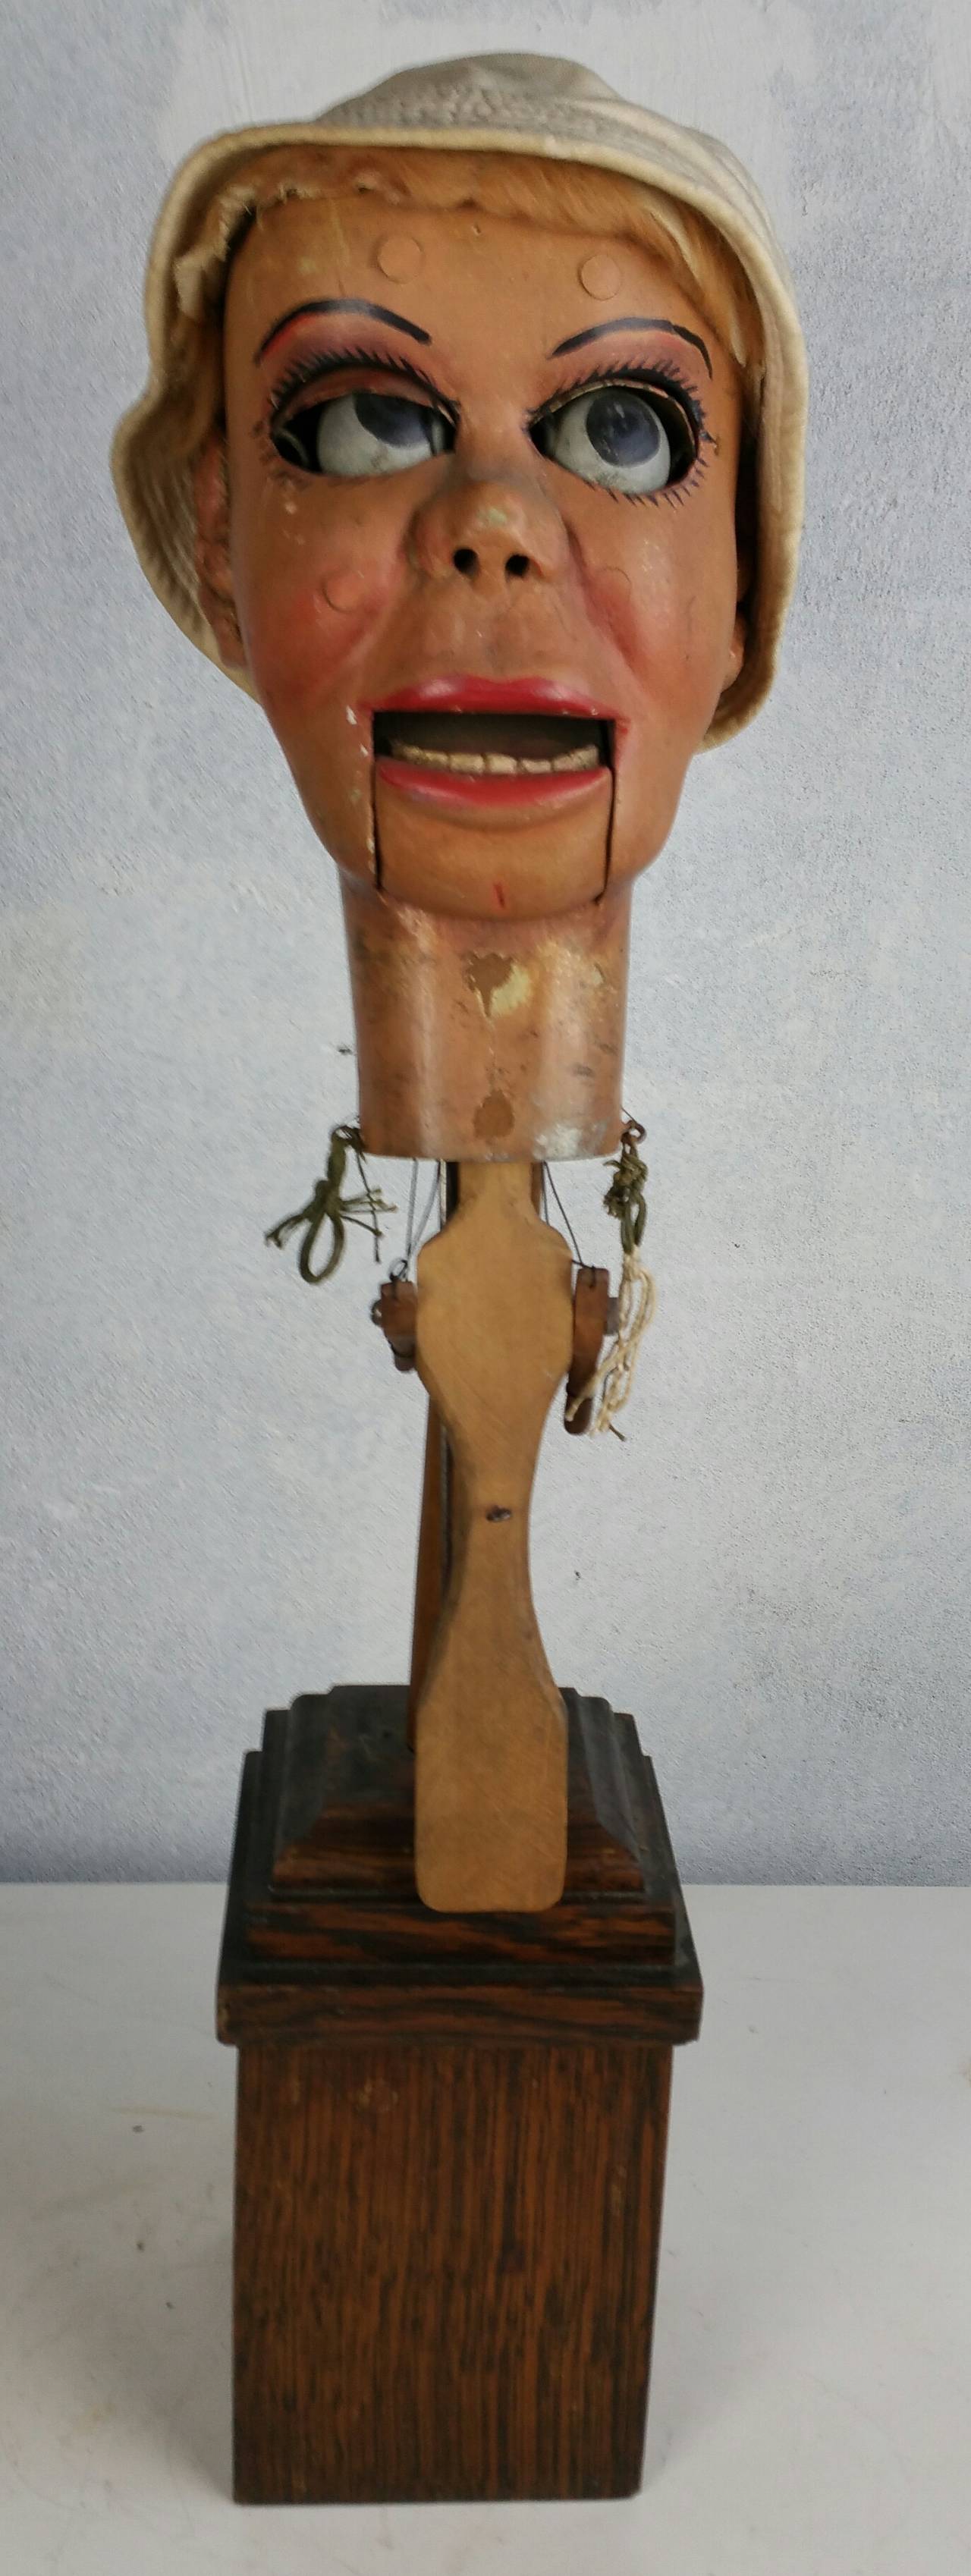 Classic 1930s Vantriloquist doll head,,Mounted on oak pedistal.. Early Mechanism moves head,eyes,,eyelids and mouth,,Great patina,, age appropriate wear,,Head measures 11